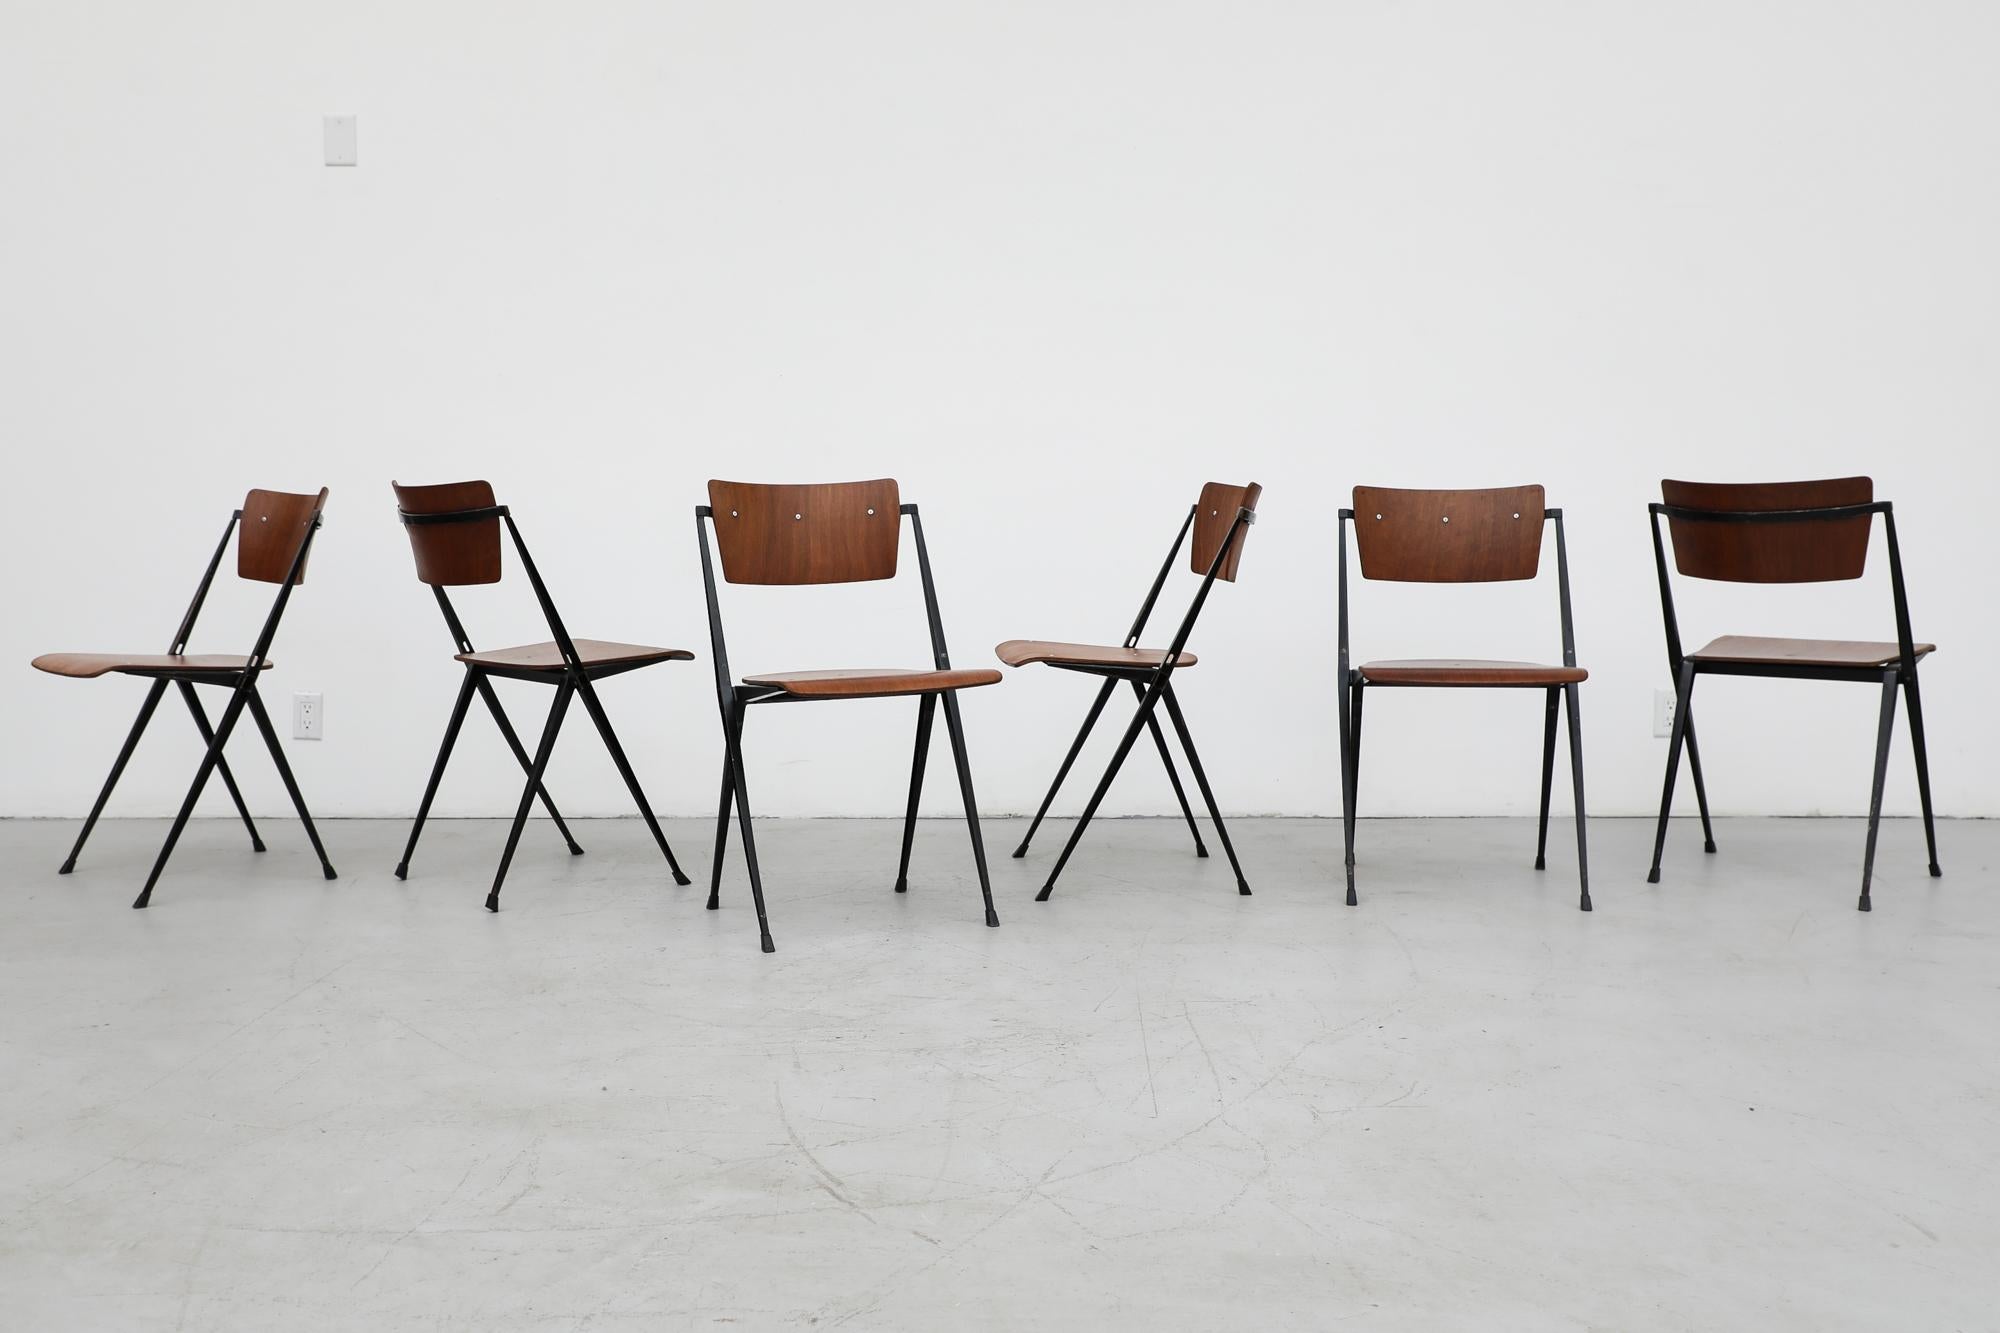 Beautiful set of 6 Wim Rietveld 'Pyramid' stacking chairs for Ahrend de Cirkel. Rewarded with the 1960 ‘Signe d’Or’ Design Award these extremely durable and comfortable chairs are in original condition with some visible wear consistent with their